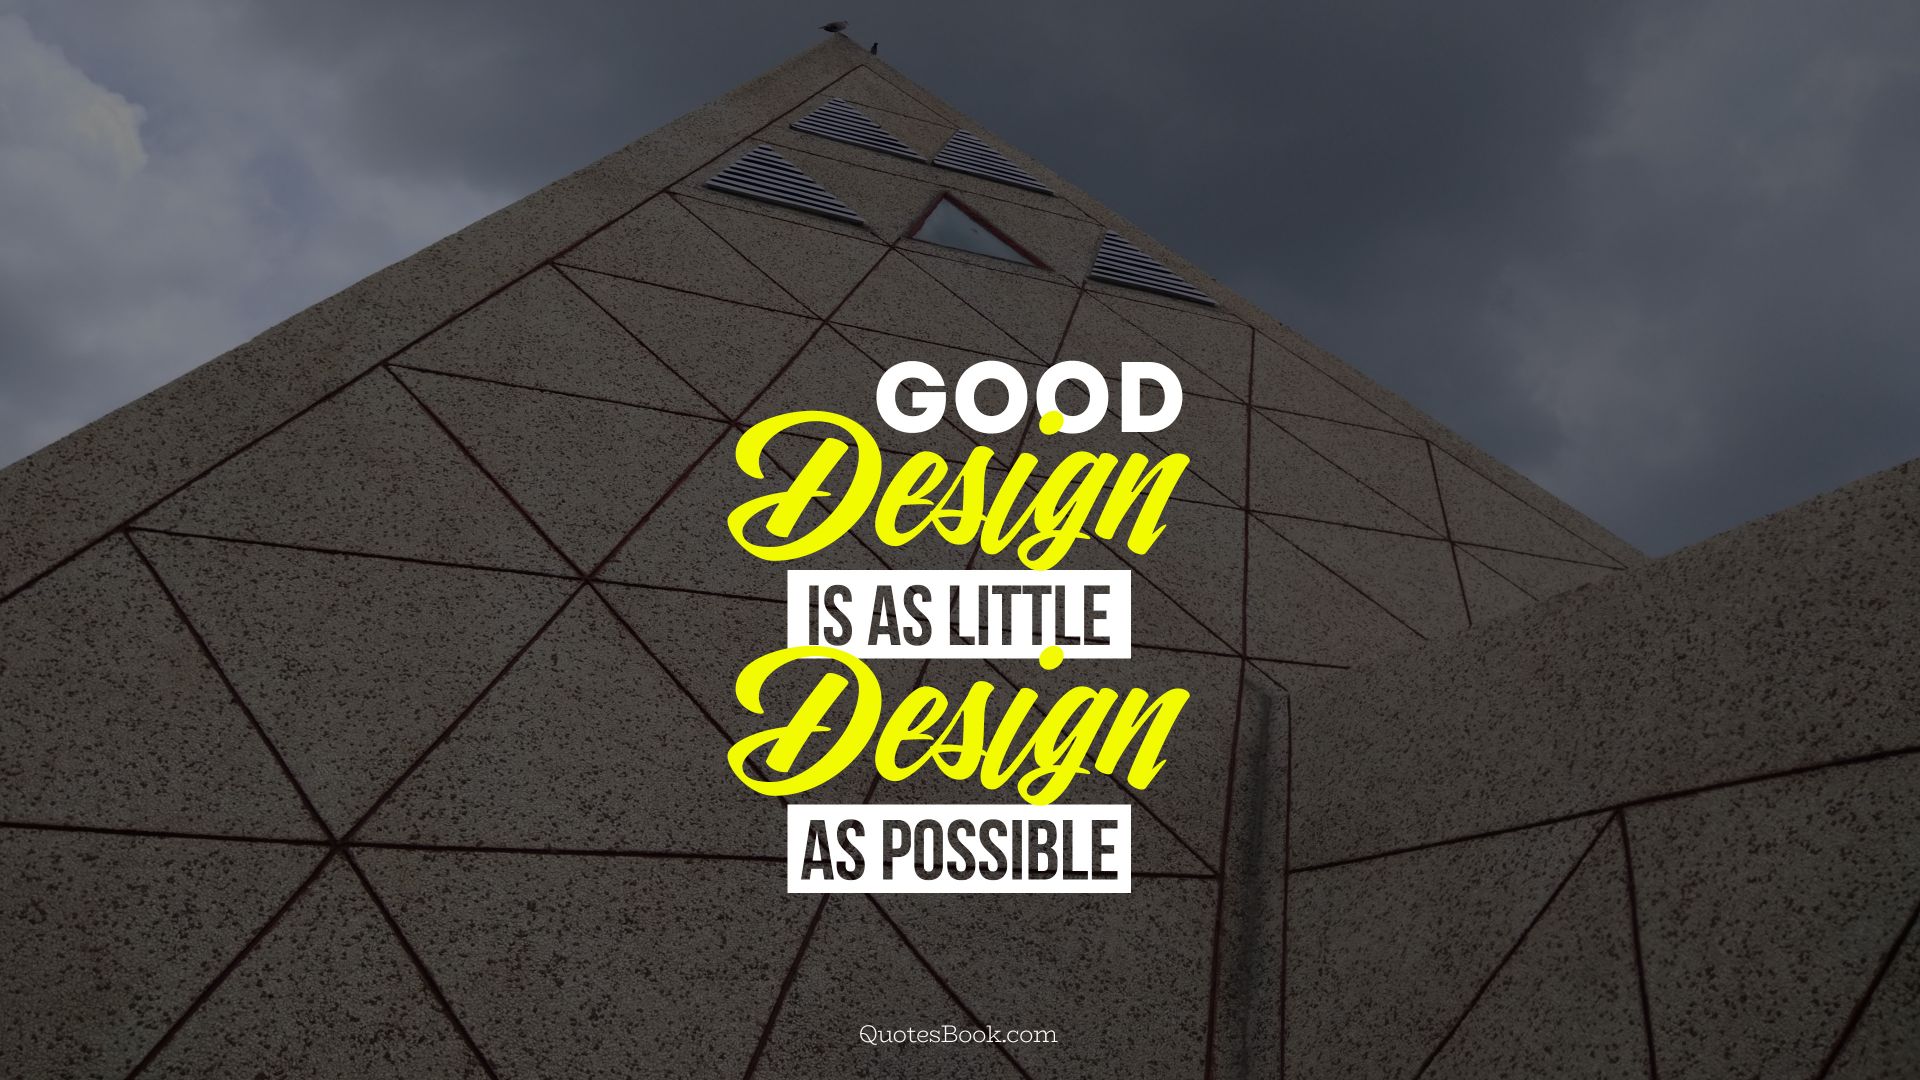 Good design is as little design as possible